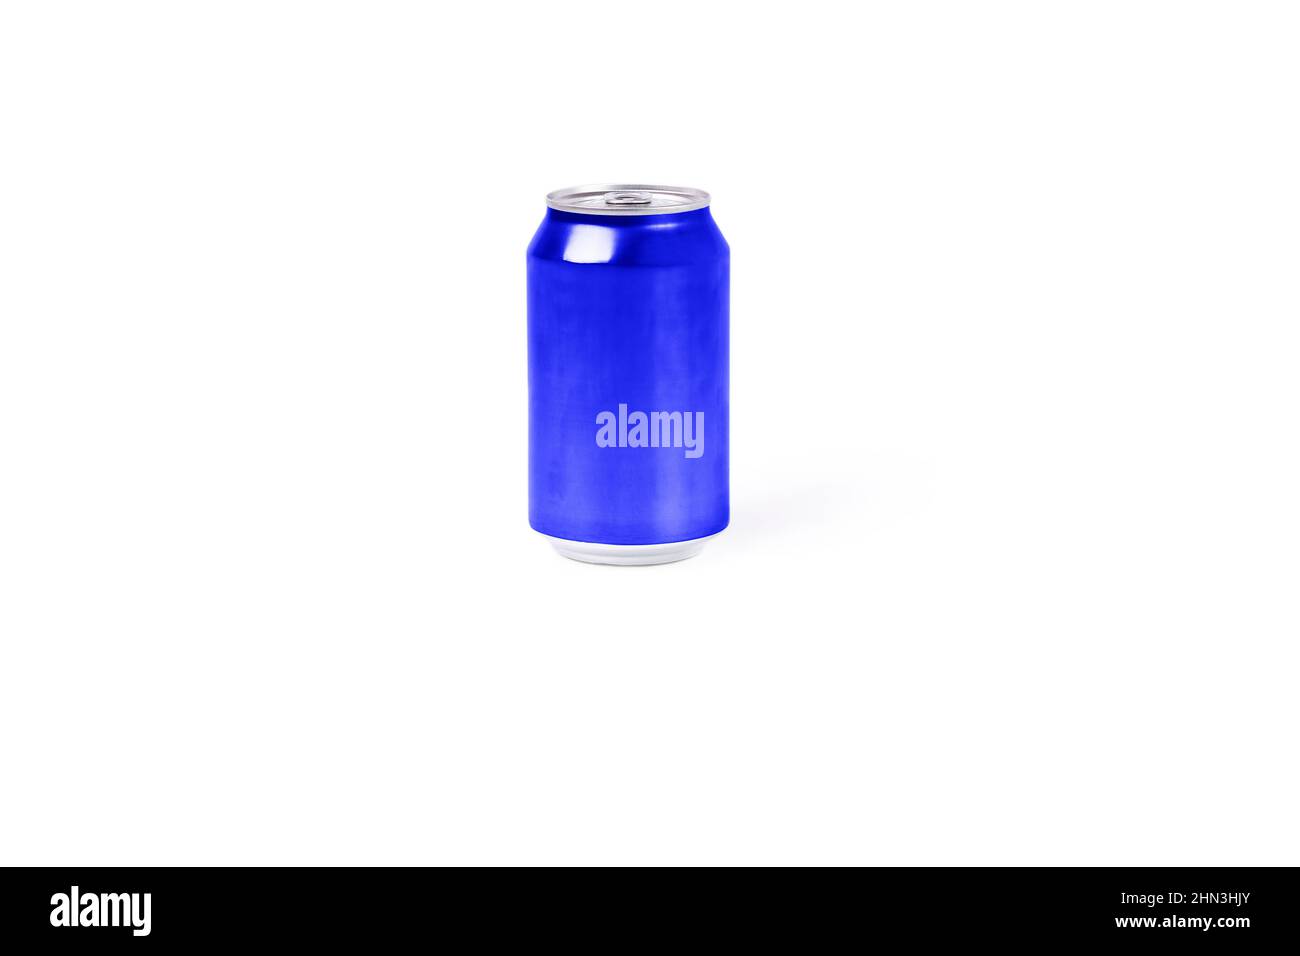 Blue aluminum can on a white background. Refreshing drink concept Stock Photo